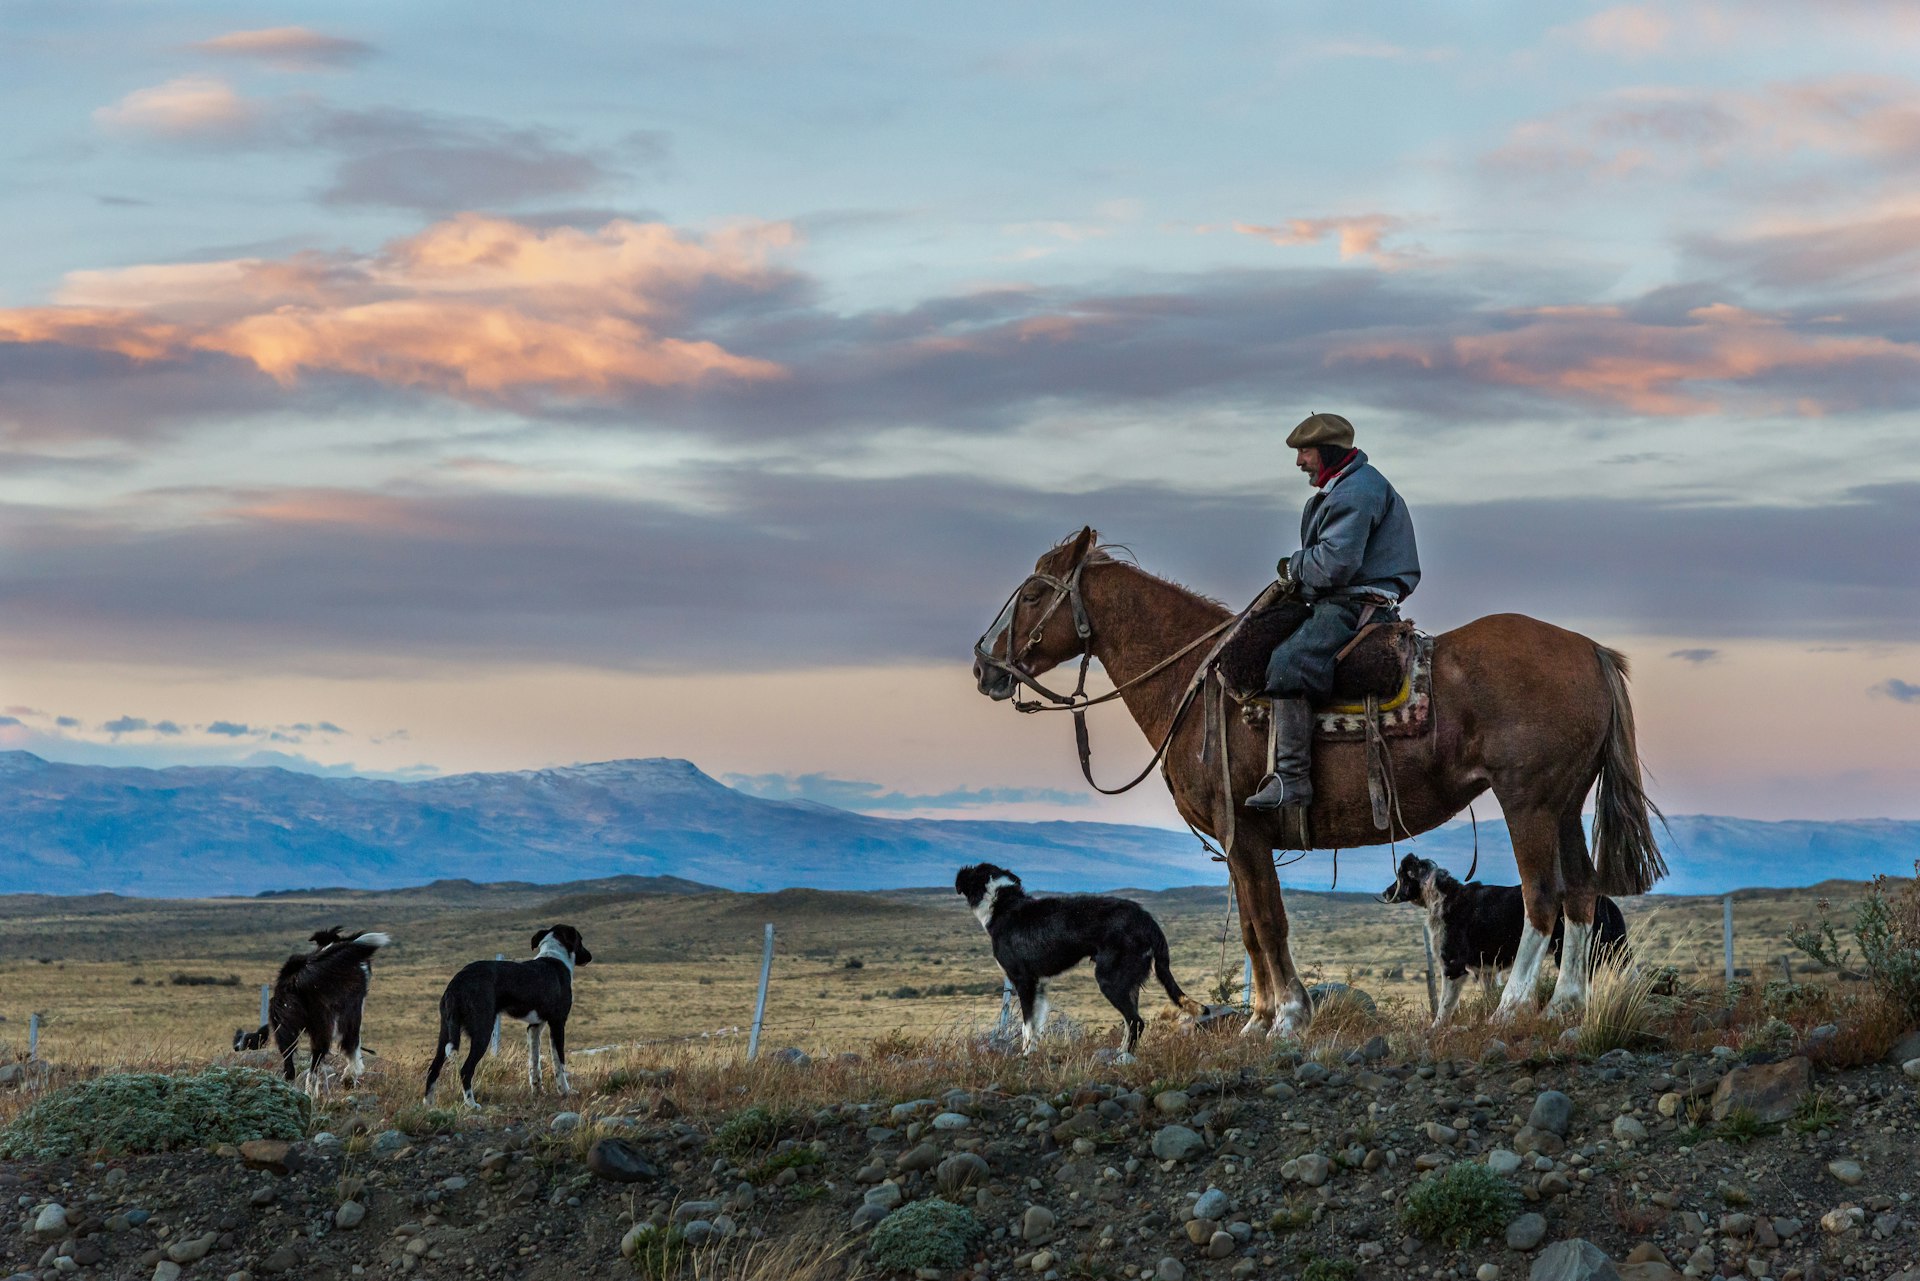 500px Photo ID: 180201631 - Coming back from some late afternoon shooting in Los Glaciares in Patagonia we were held up by a herd of sheep being driven across the road by several gauchos and their sheep dogs.  It was a major hold-up to funnel the hundreds